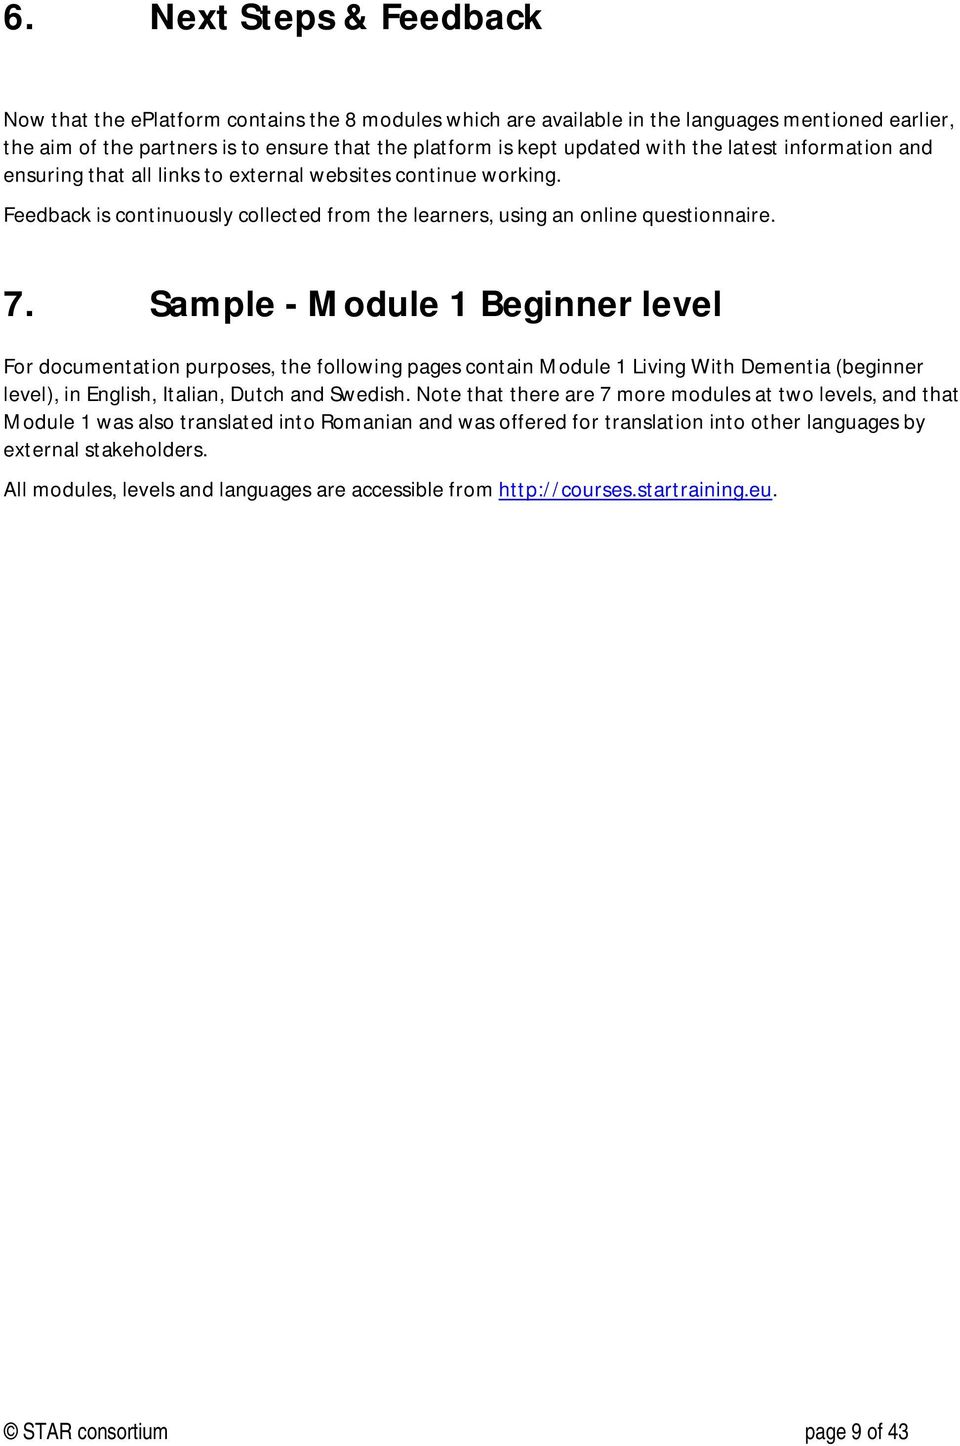 Sample - Module 1 Beginner level For documentation purposes, the following pages contain Module 1 Living With Dementia (beginner level), in English, Italian, Dutch and Swedish.